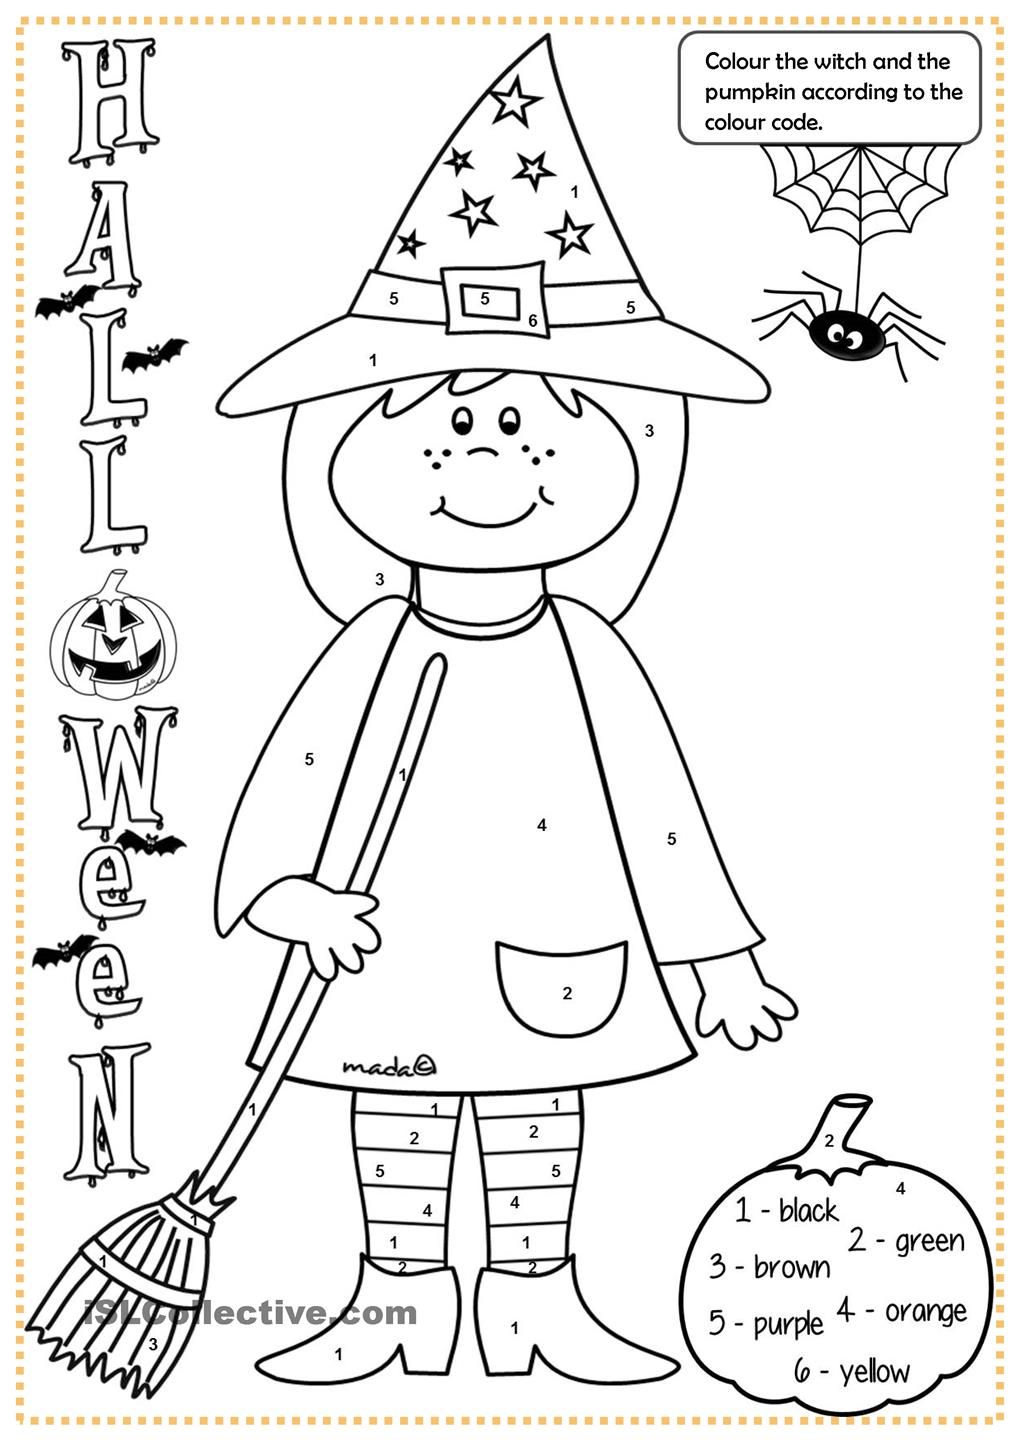 Halloween Witch - Colouring | Halloween Worksheets